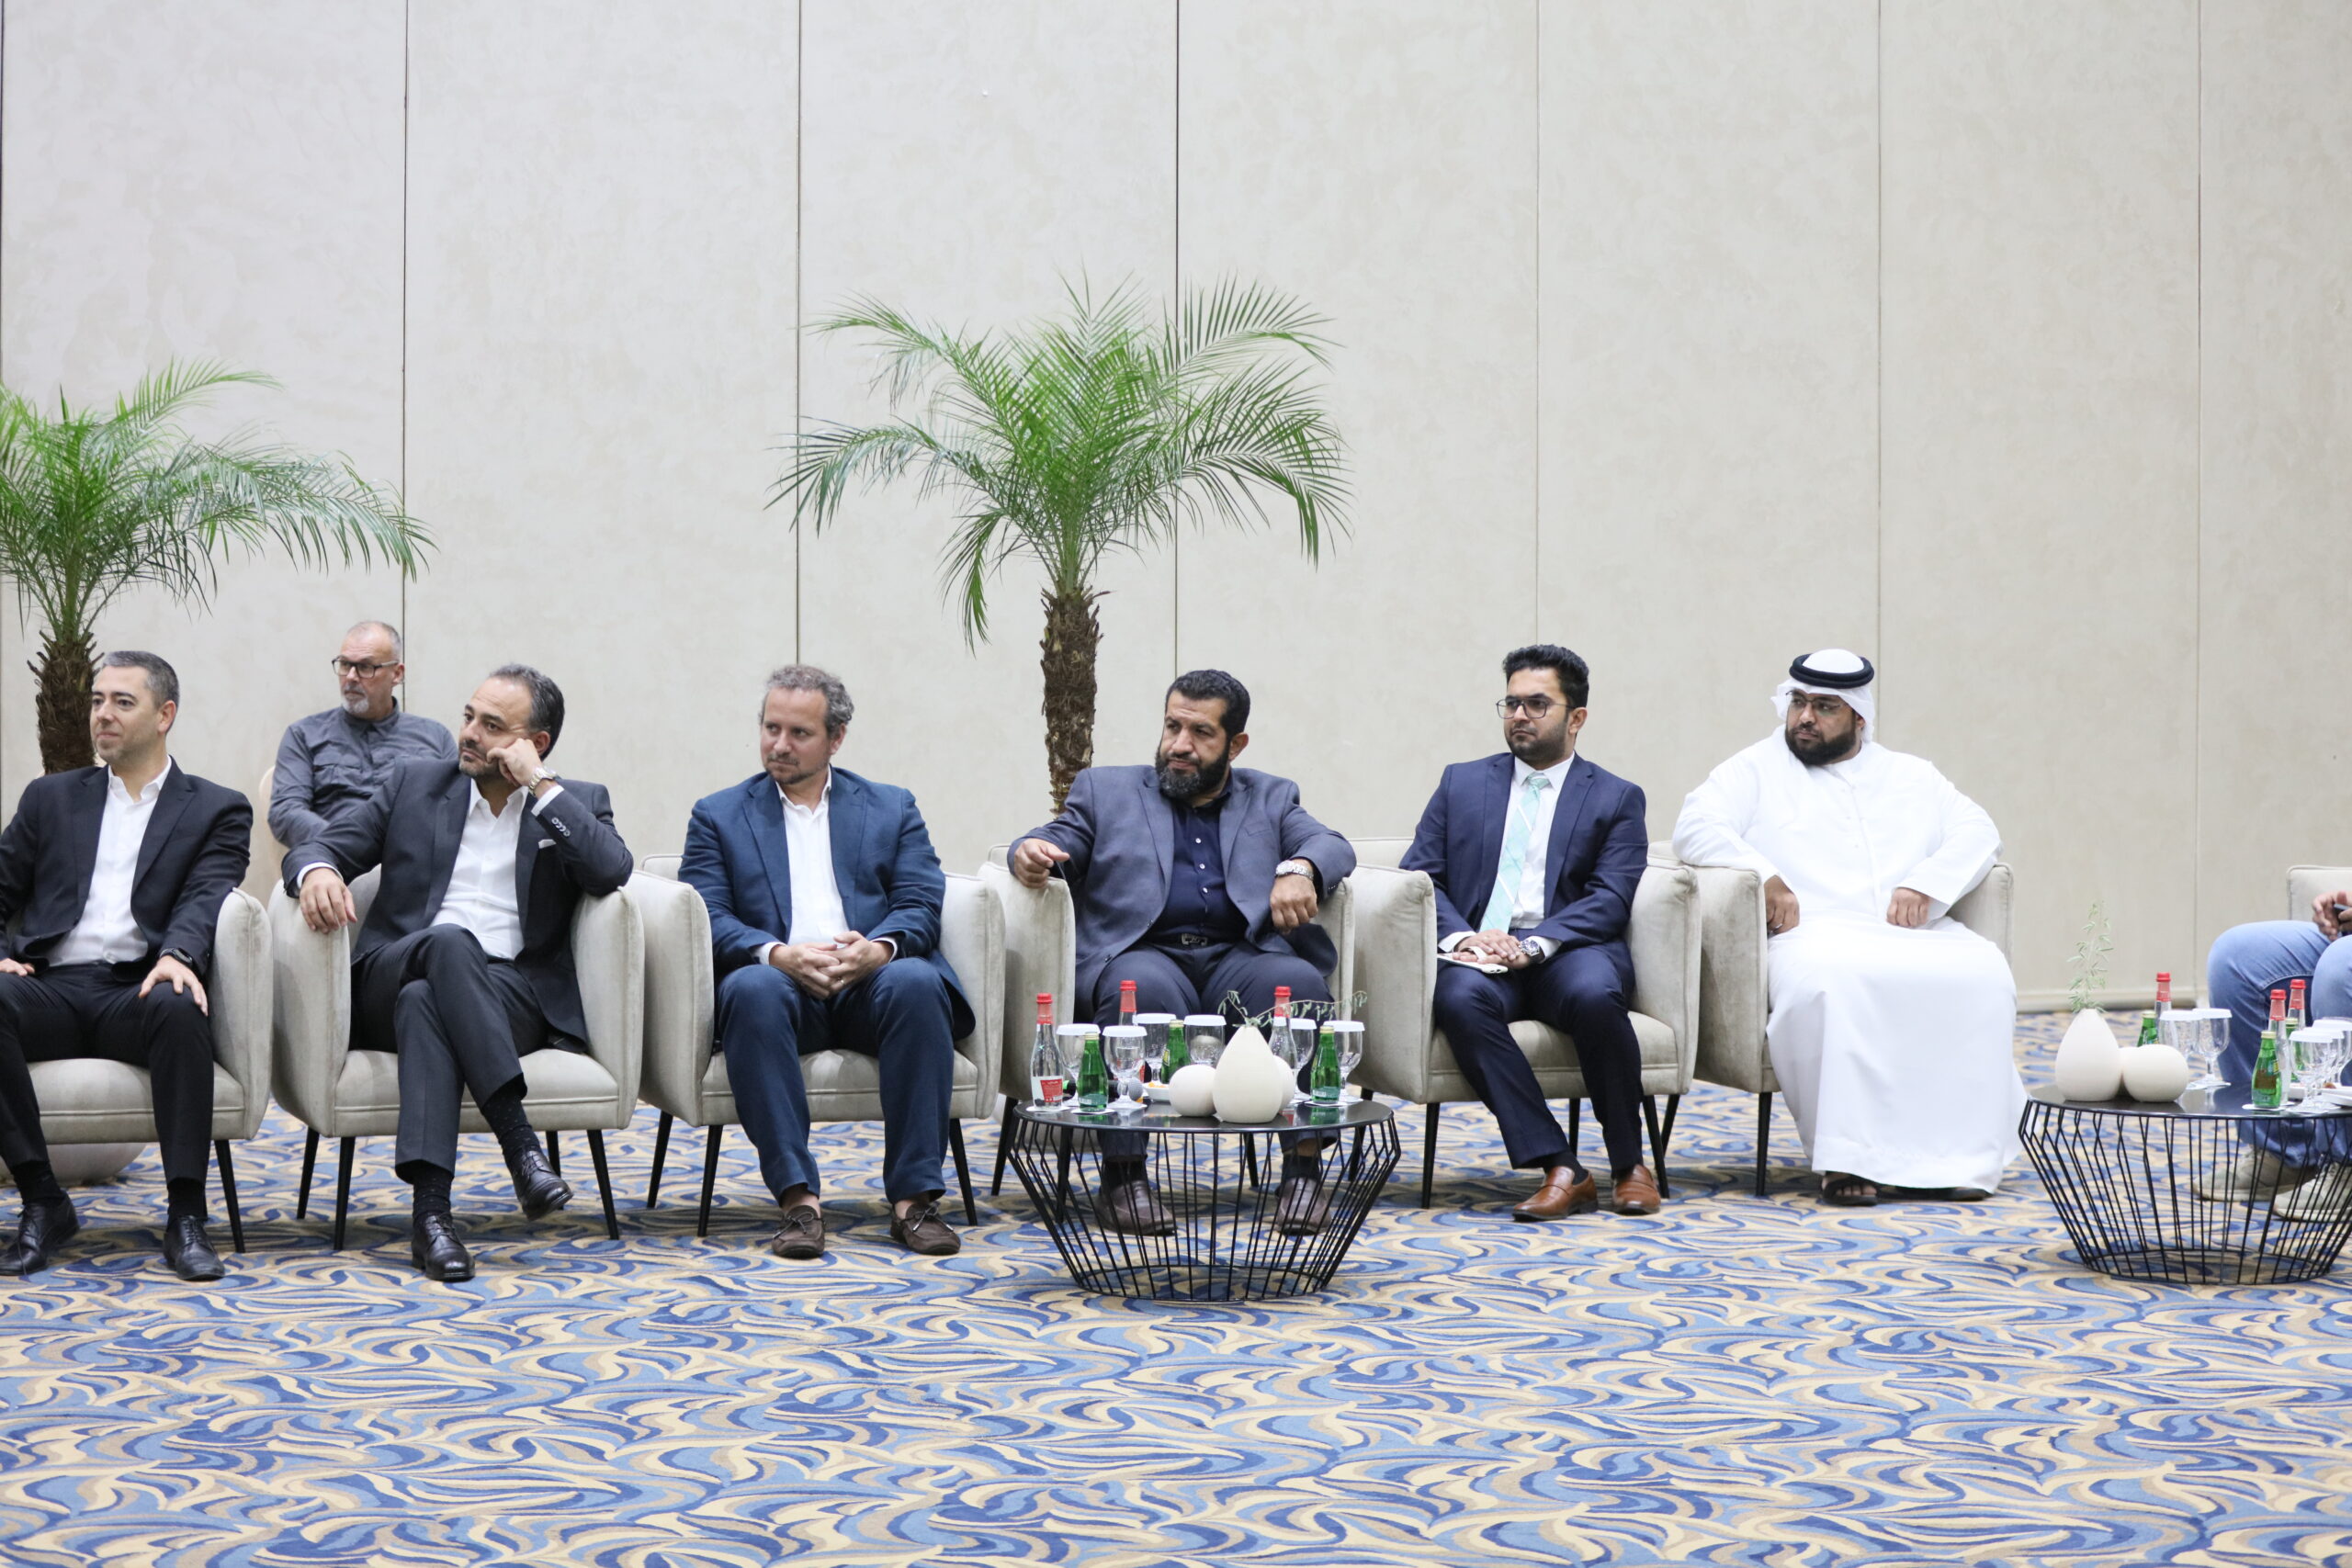 Image for H.E. Mariam Almheiri Leads Discussions With Food Experts On How To Accelerate The UAE’s Food Systems Sustainabile Transformation